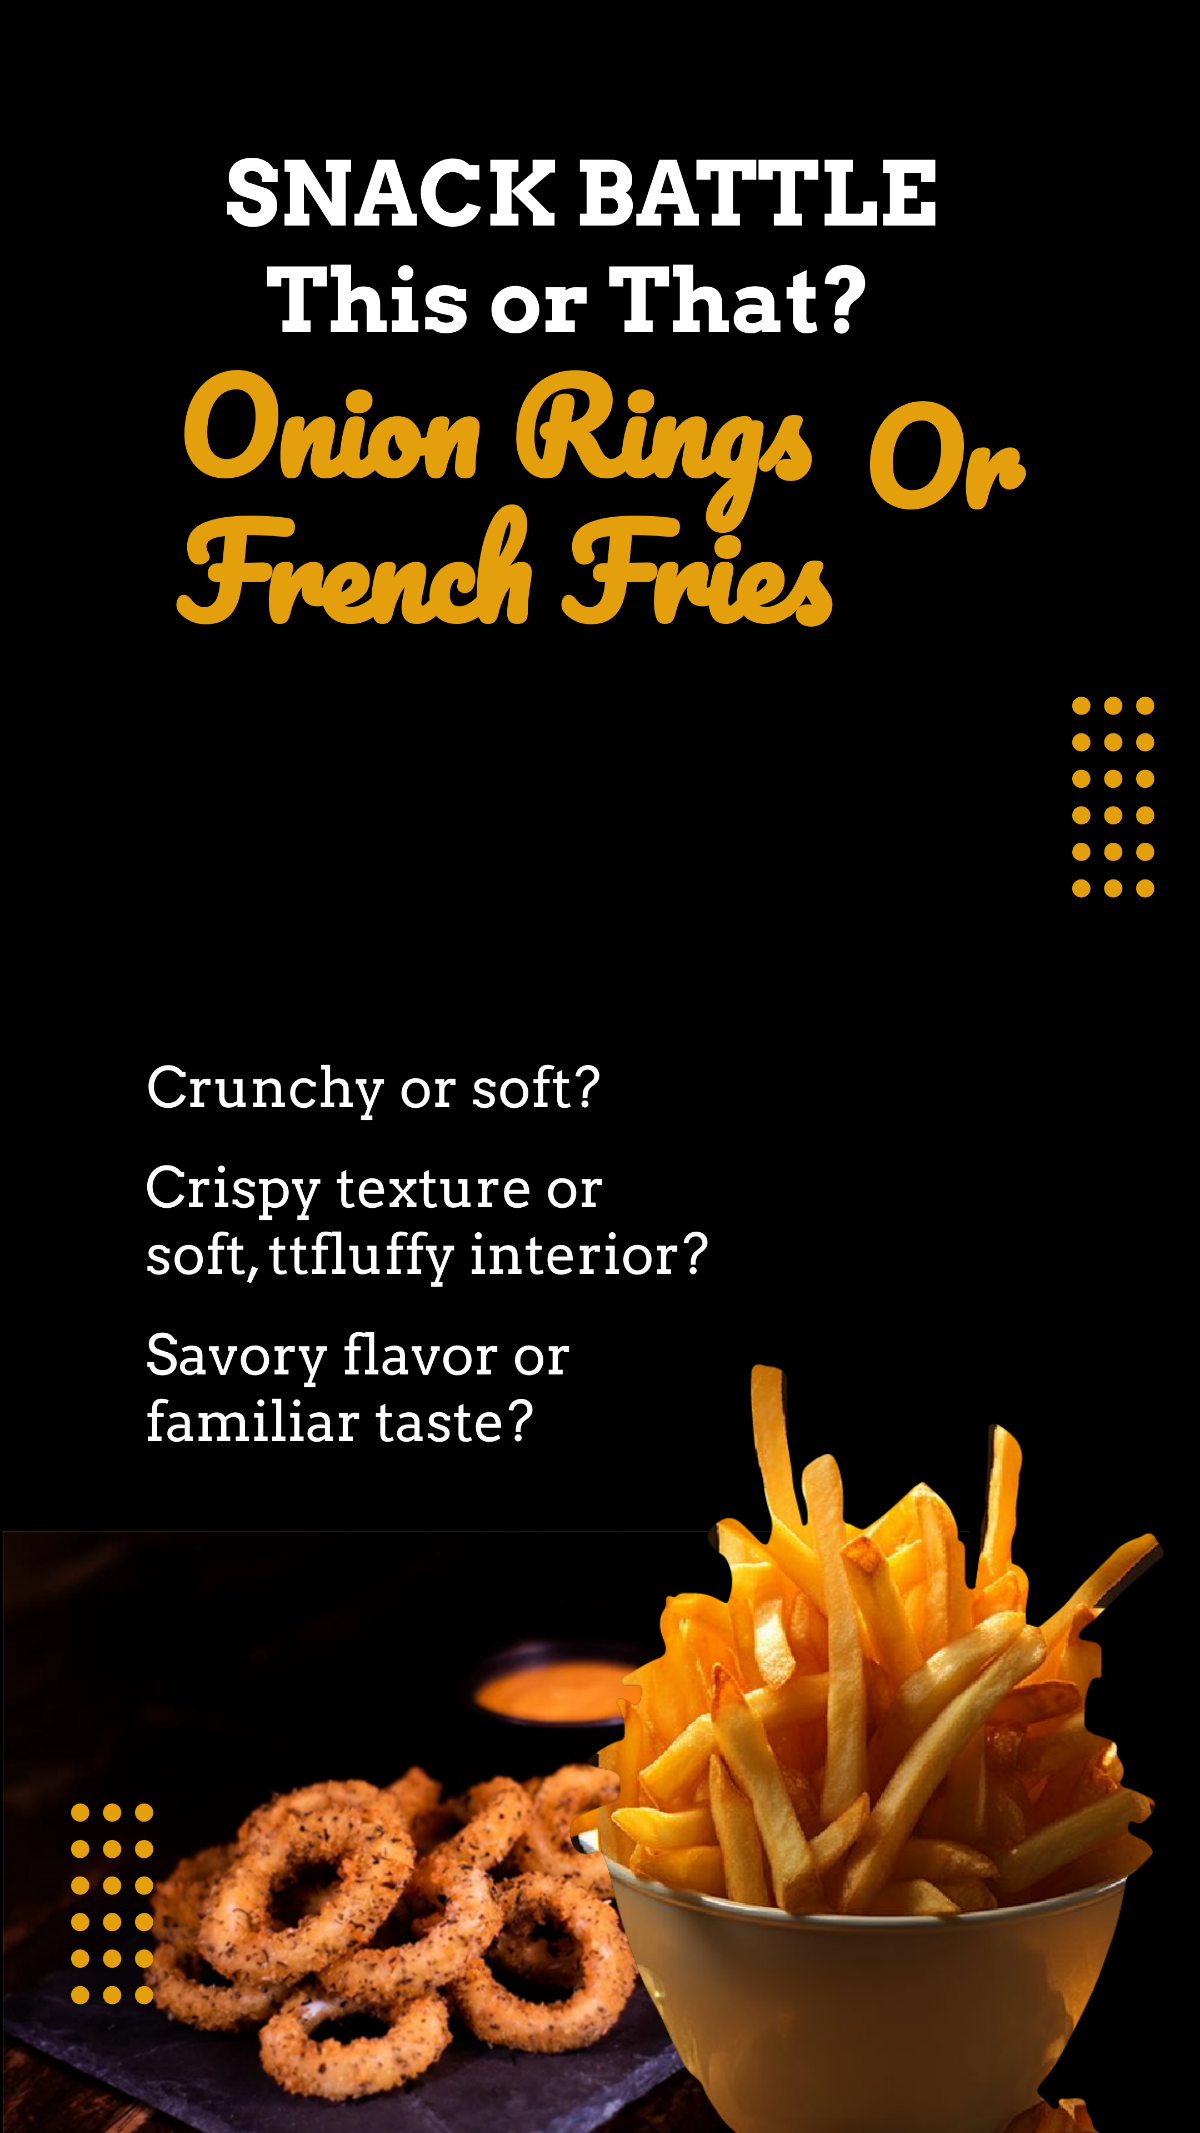 Free Onion Rings or French Fries This or That Instagram Story Template